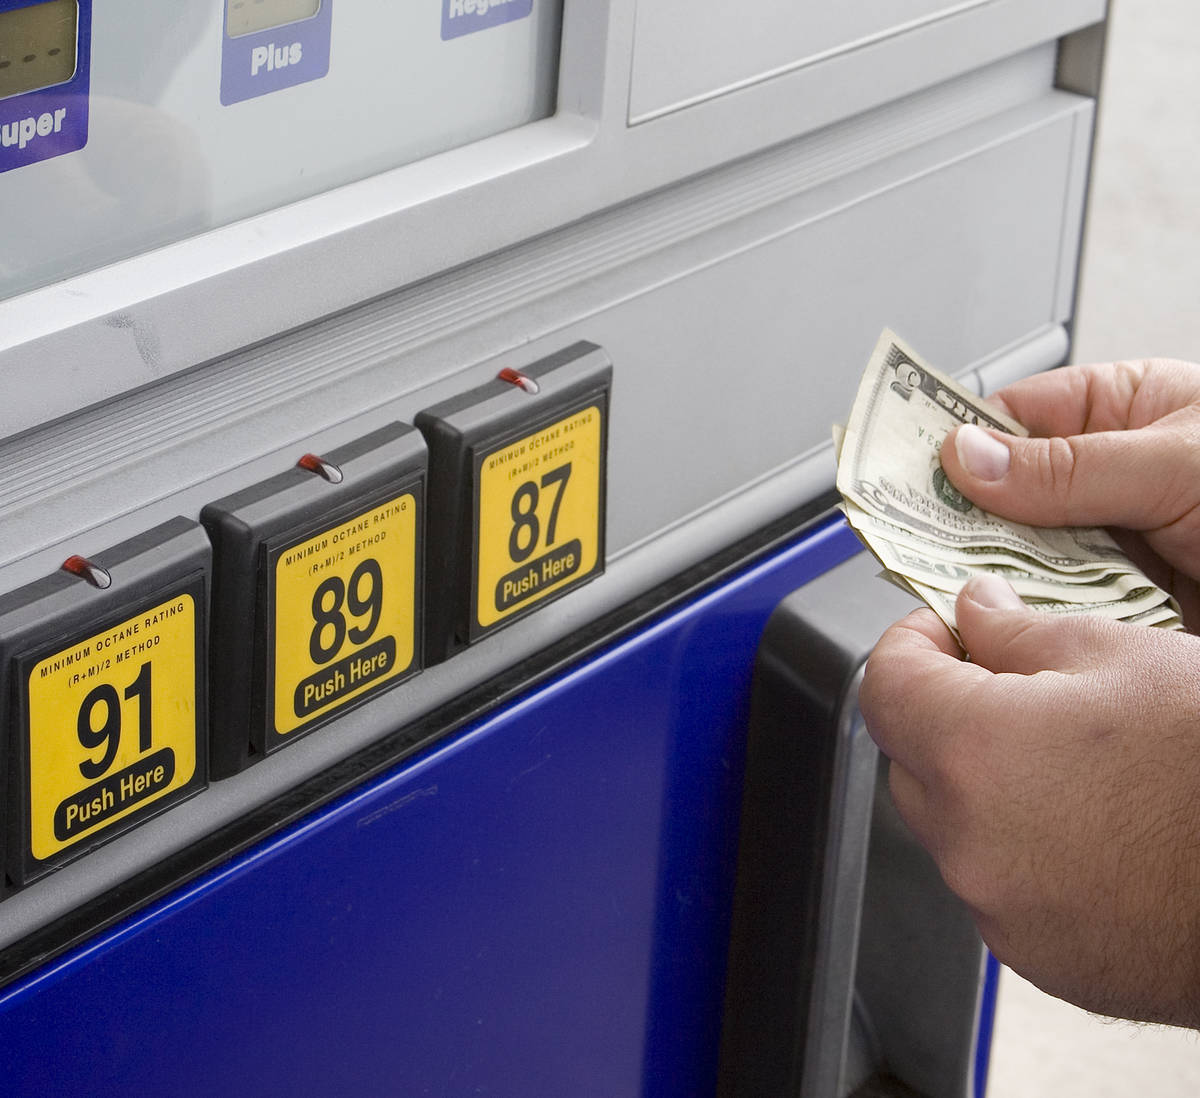 Getty Images Nevada experienced the fourth largest weekly decrease in the price of gasoline th ...